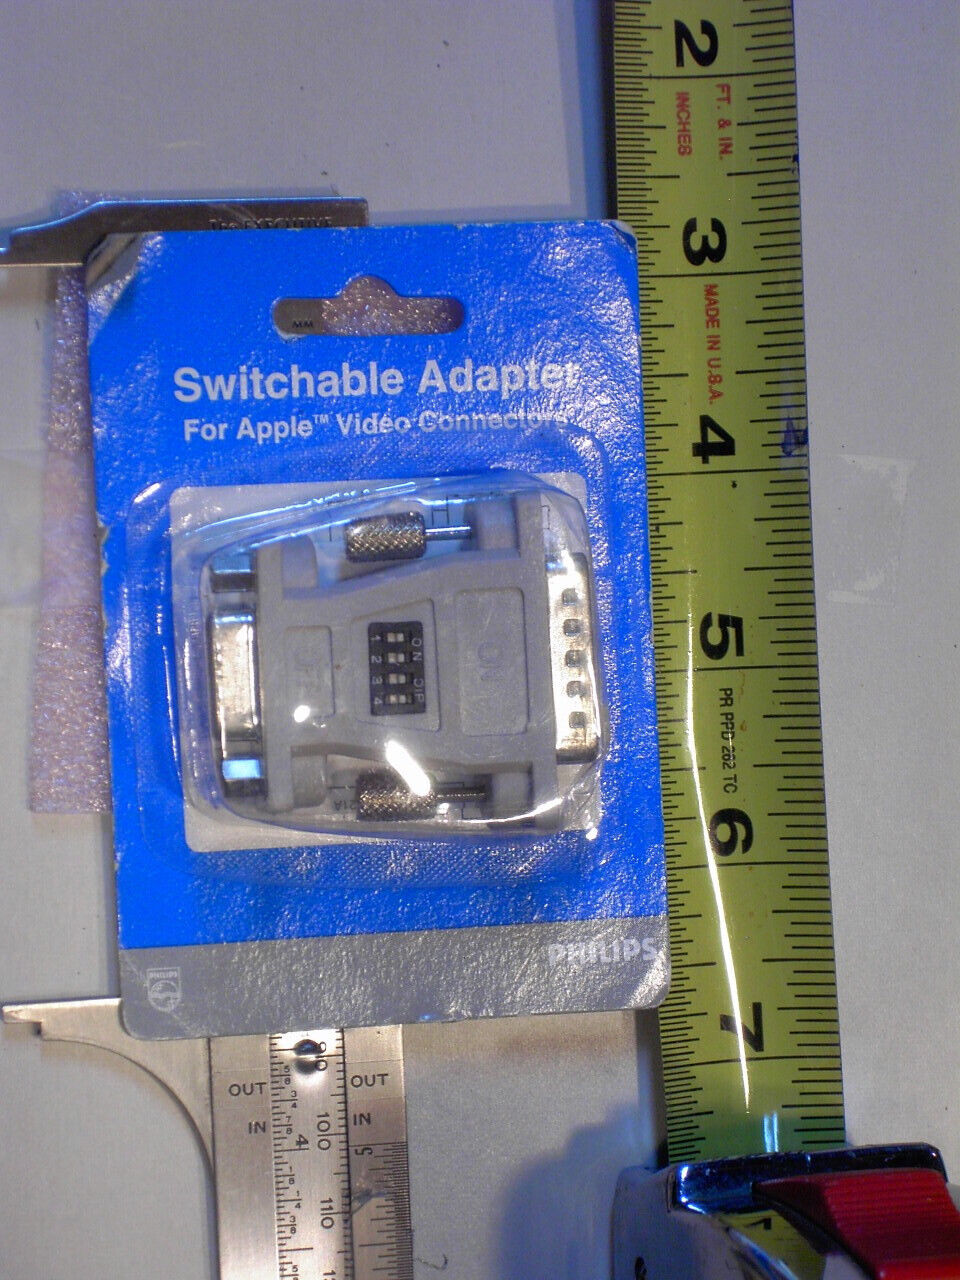 Philips Switchable ADAPTER APPLE VIDEO CONN. Vintage NOS